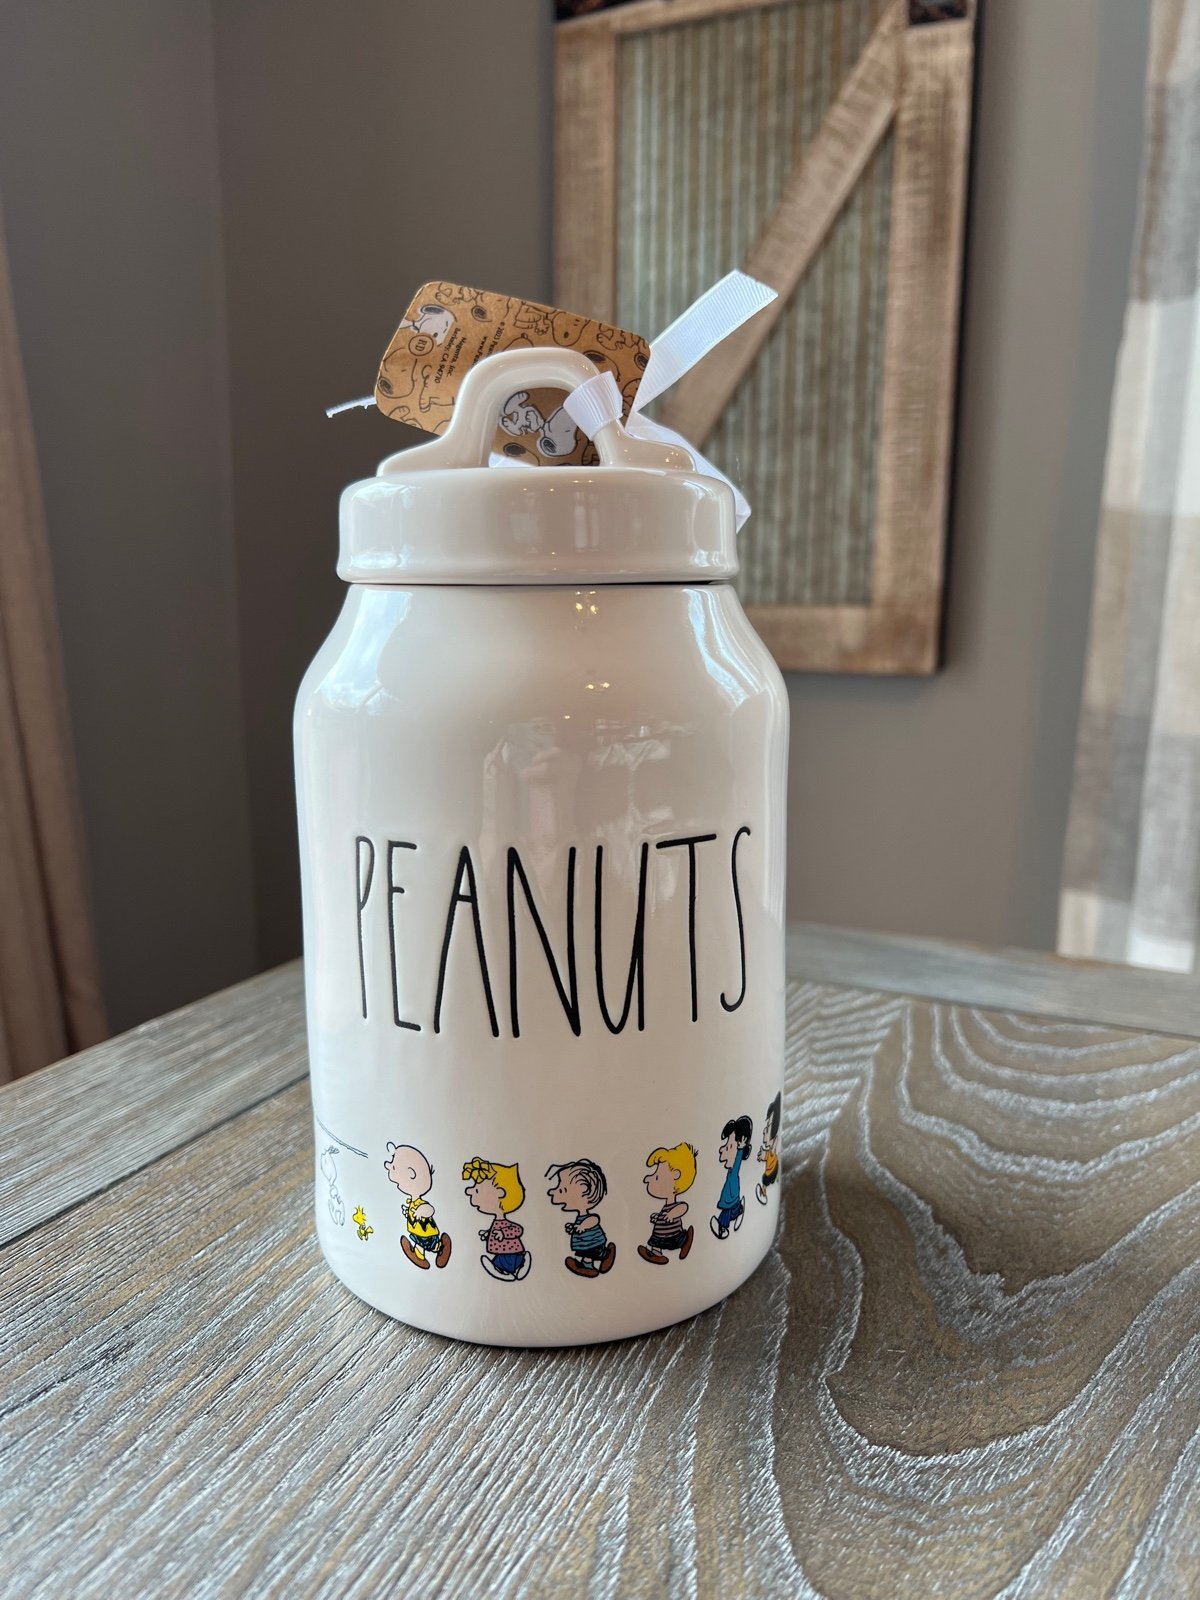 Rae Dunn Peanuts Canister nwgF0SEs3